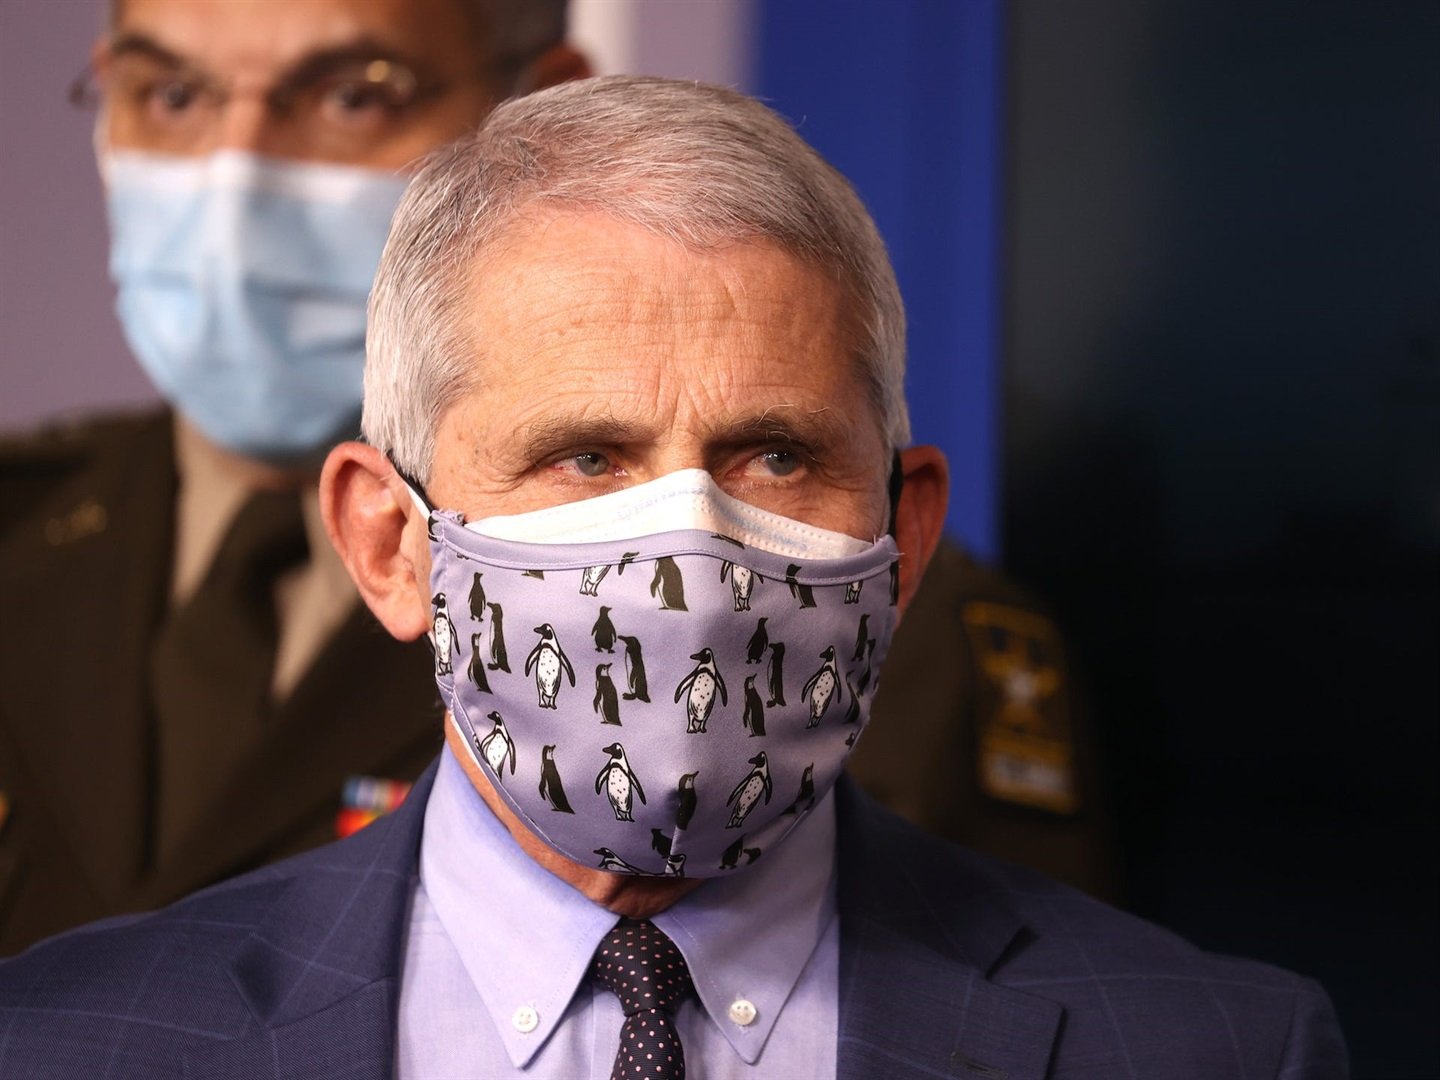 Anthony Fauci, director of the US National Institute of Allergy and Infectious Diseases, double masked during a White House Coronavirus Task Force briefing.